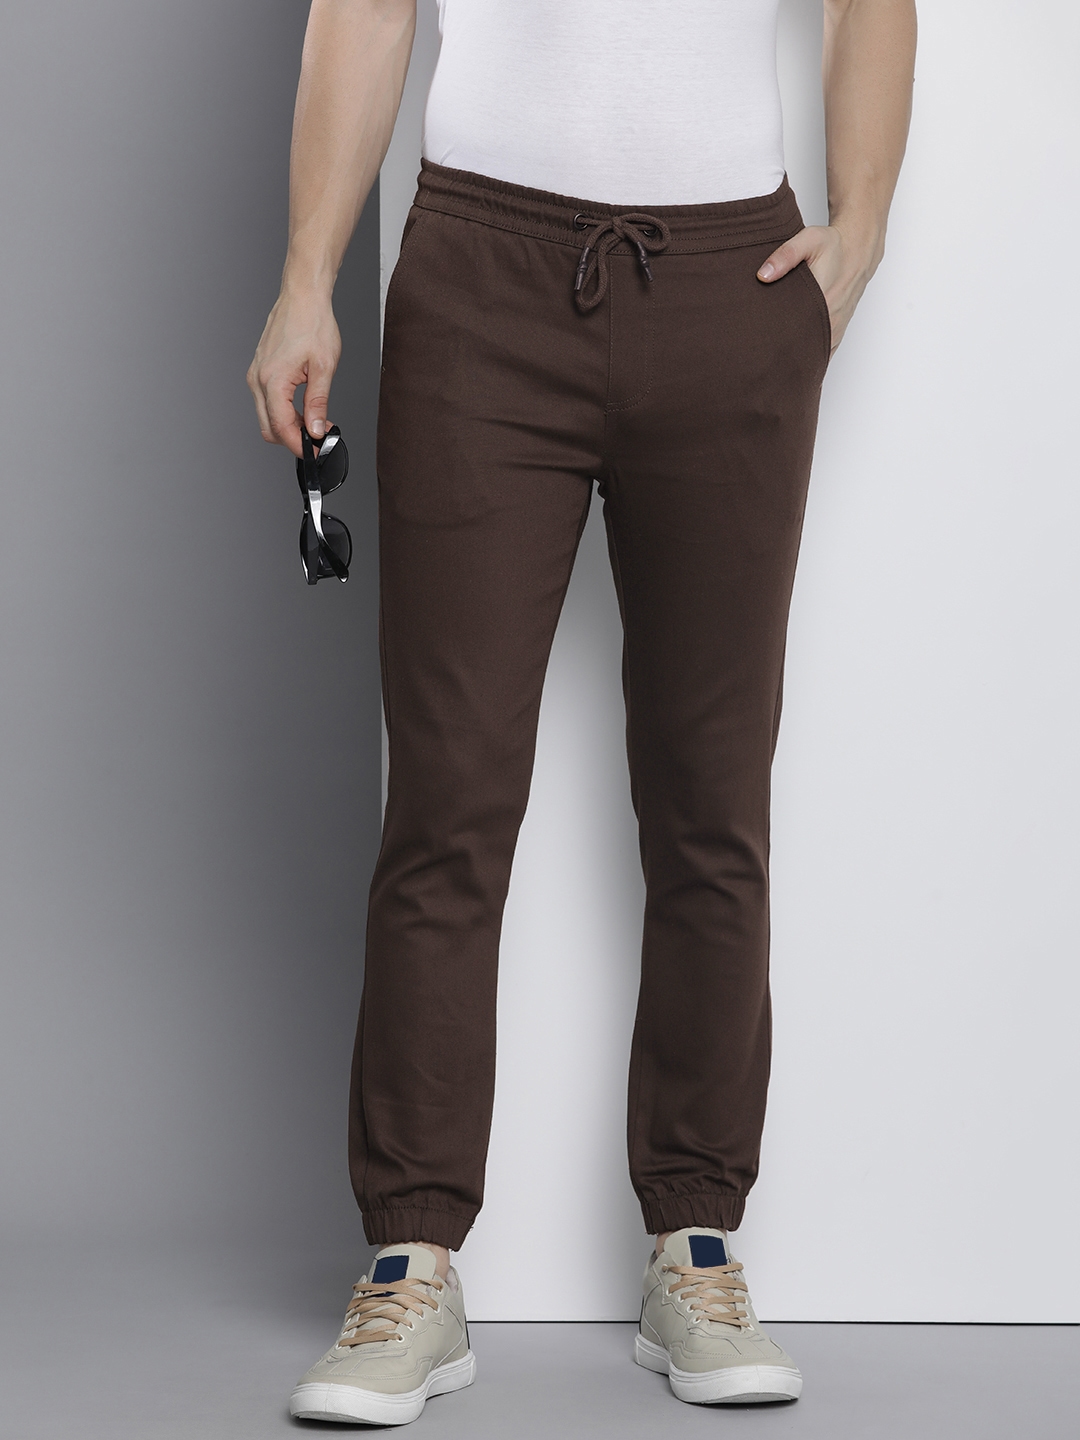 Buy The Indian Garage Co Men Slim Fit Joggers  Trousers for Men 24250902   Myntra